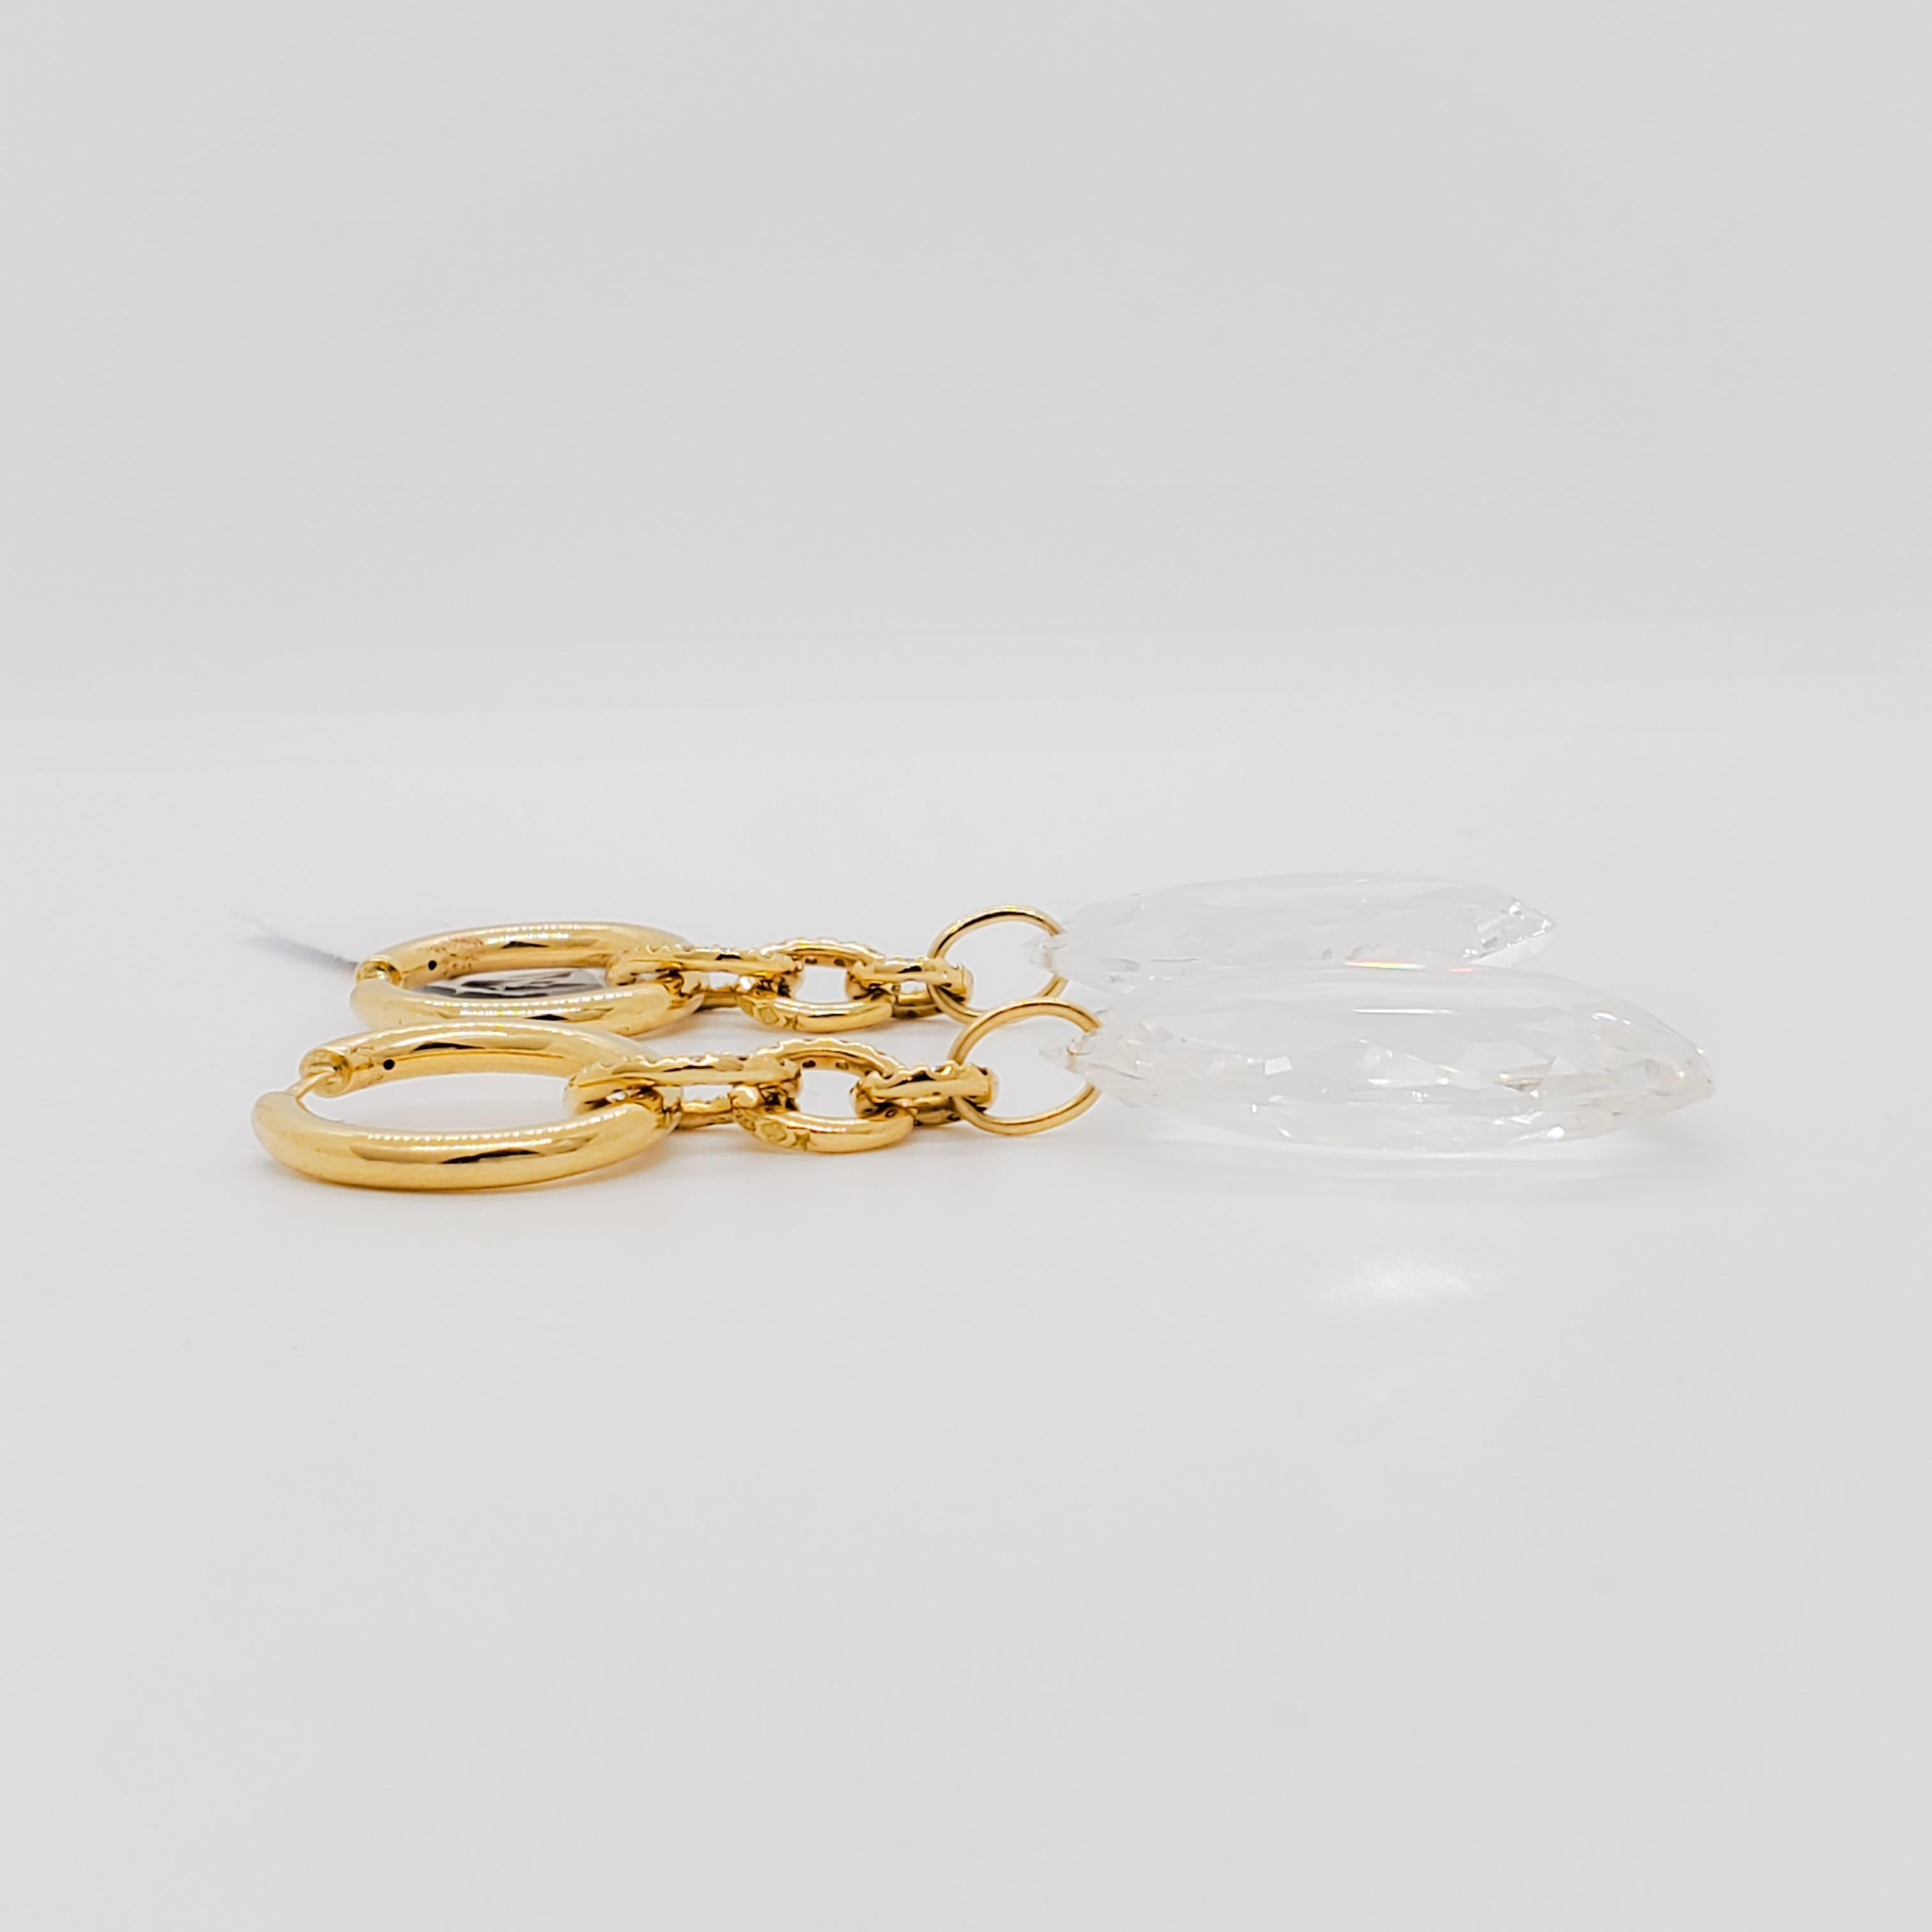 H. Stern and DVF Collaboration Dangle Earrings with Diamonds in 18k Yellow Gold 1